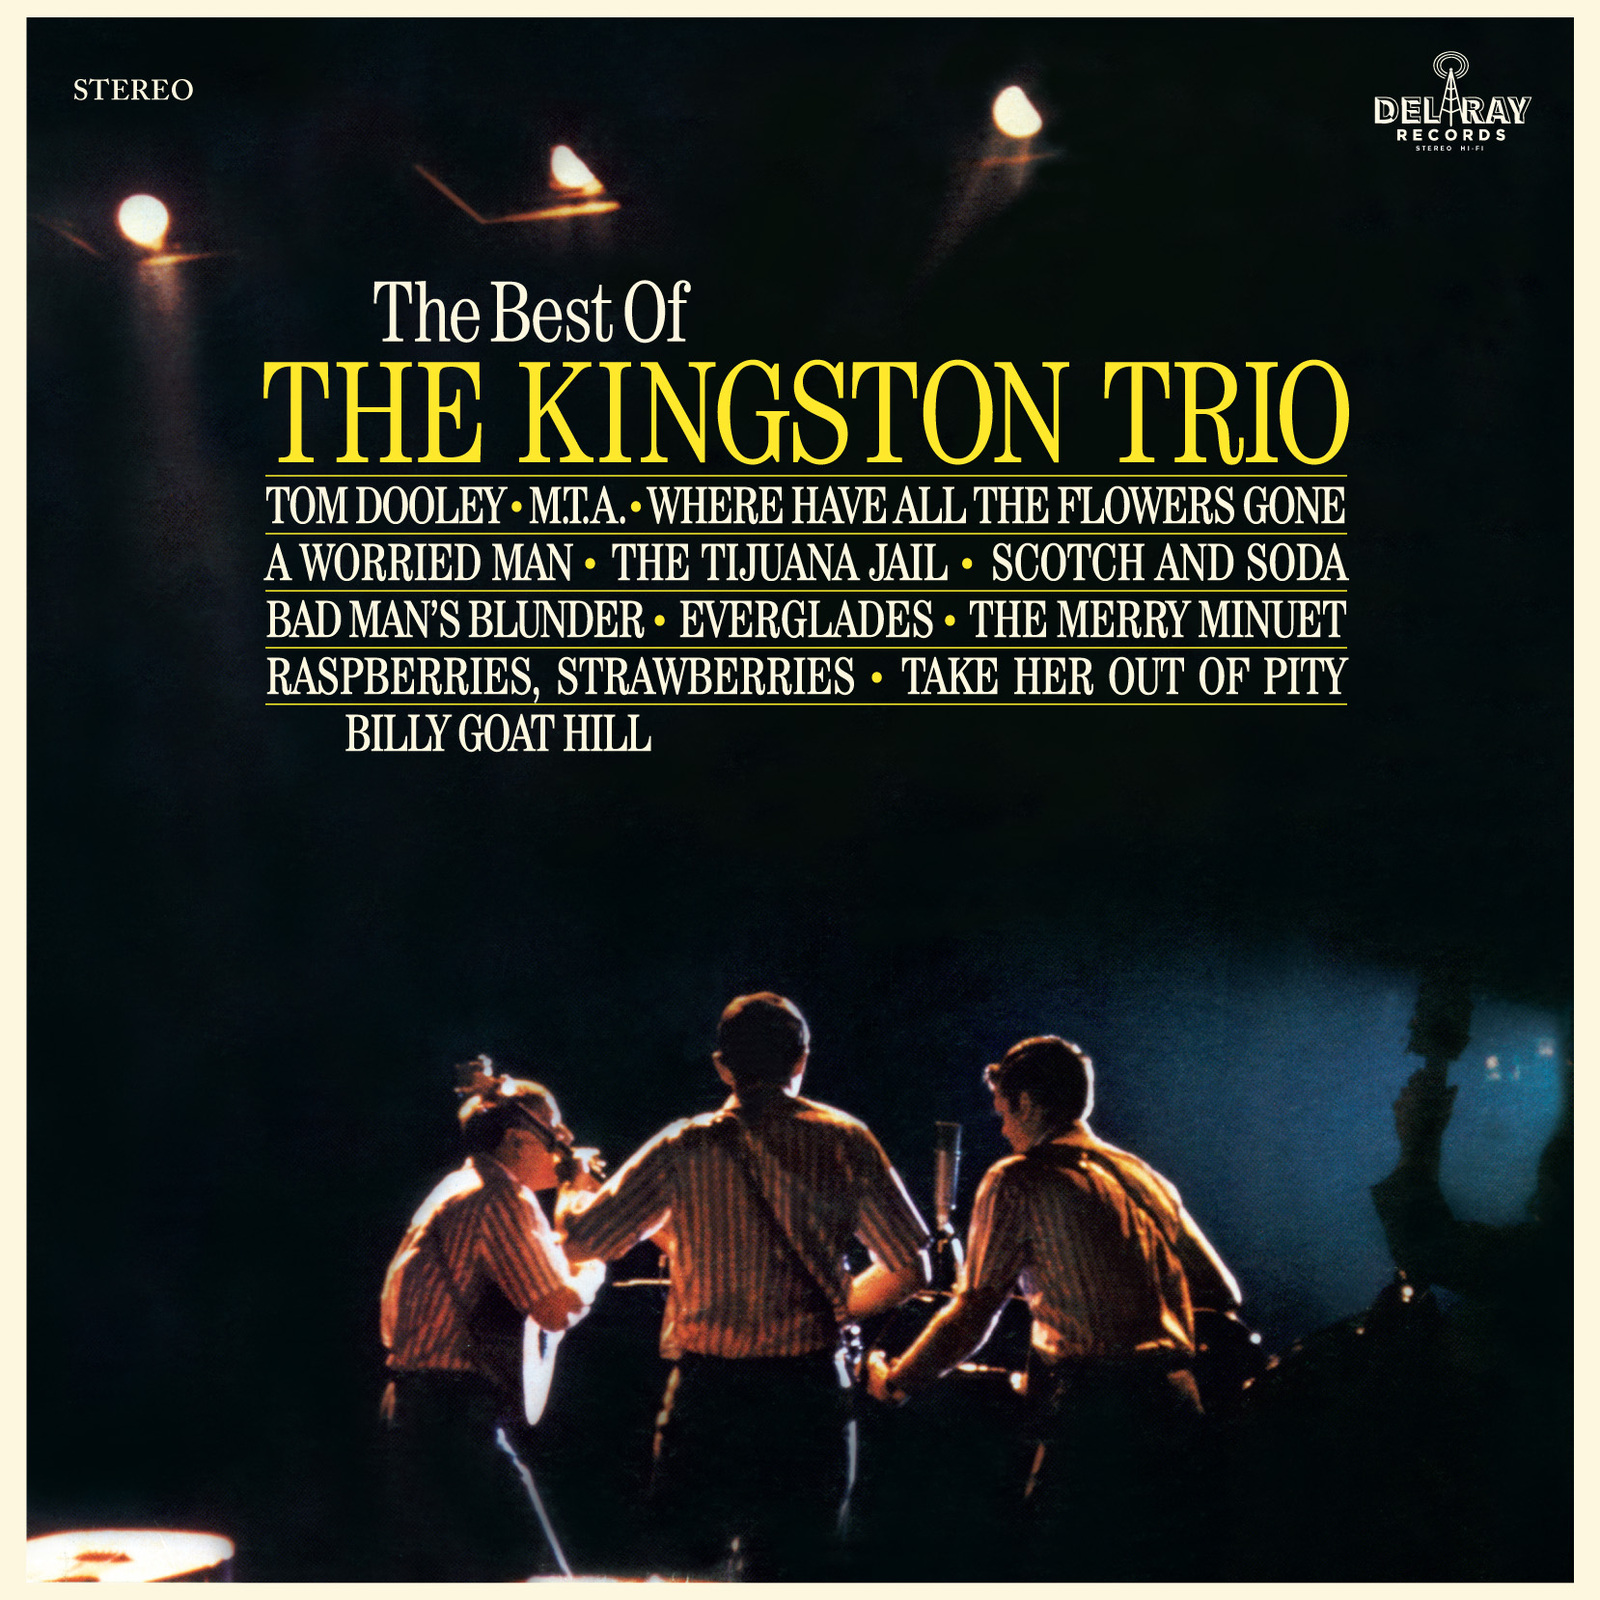 The Kingston Trio - The Ballad Of The Shape Of Things 